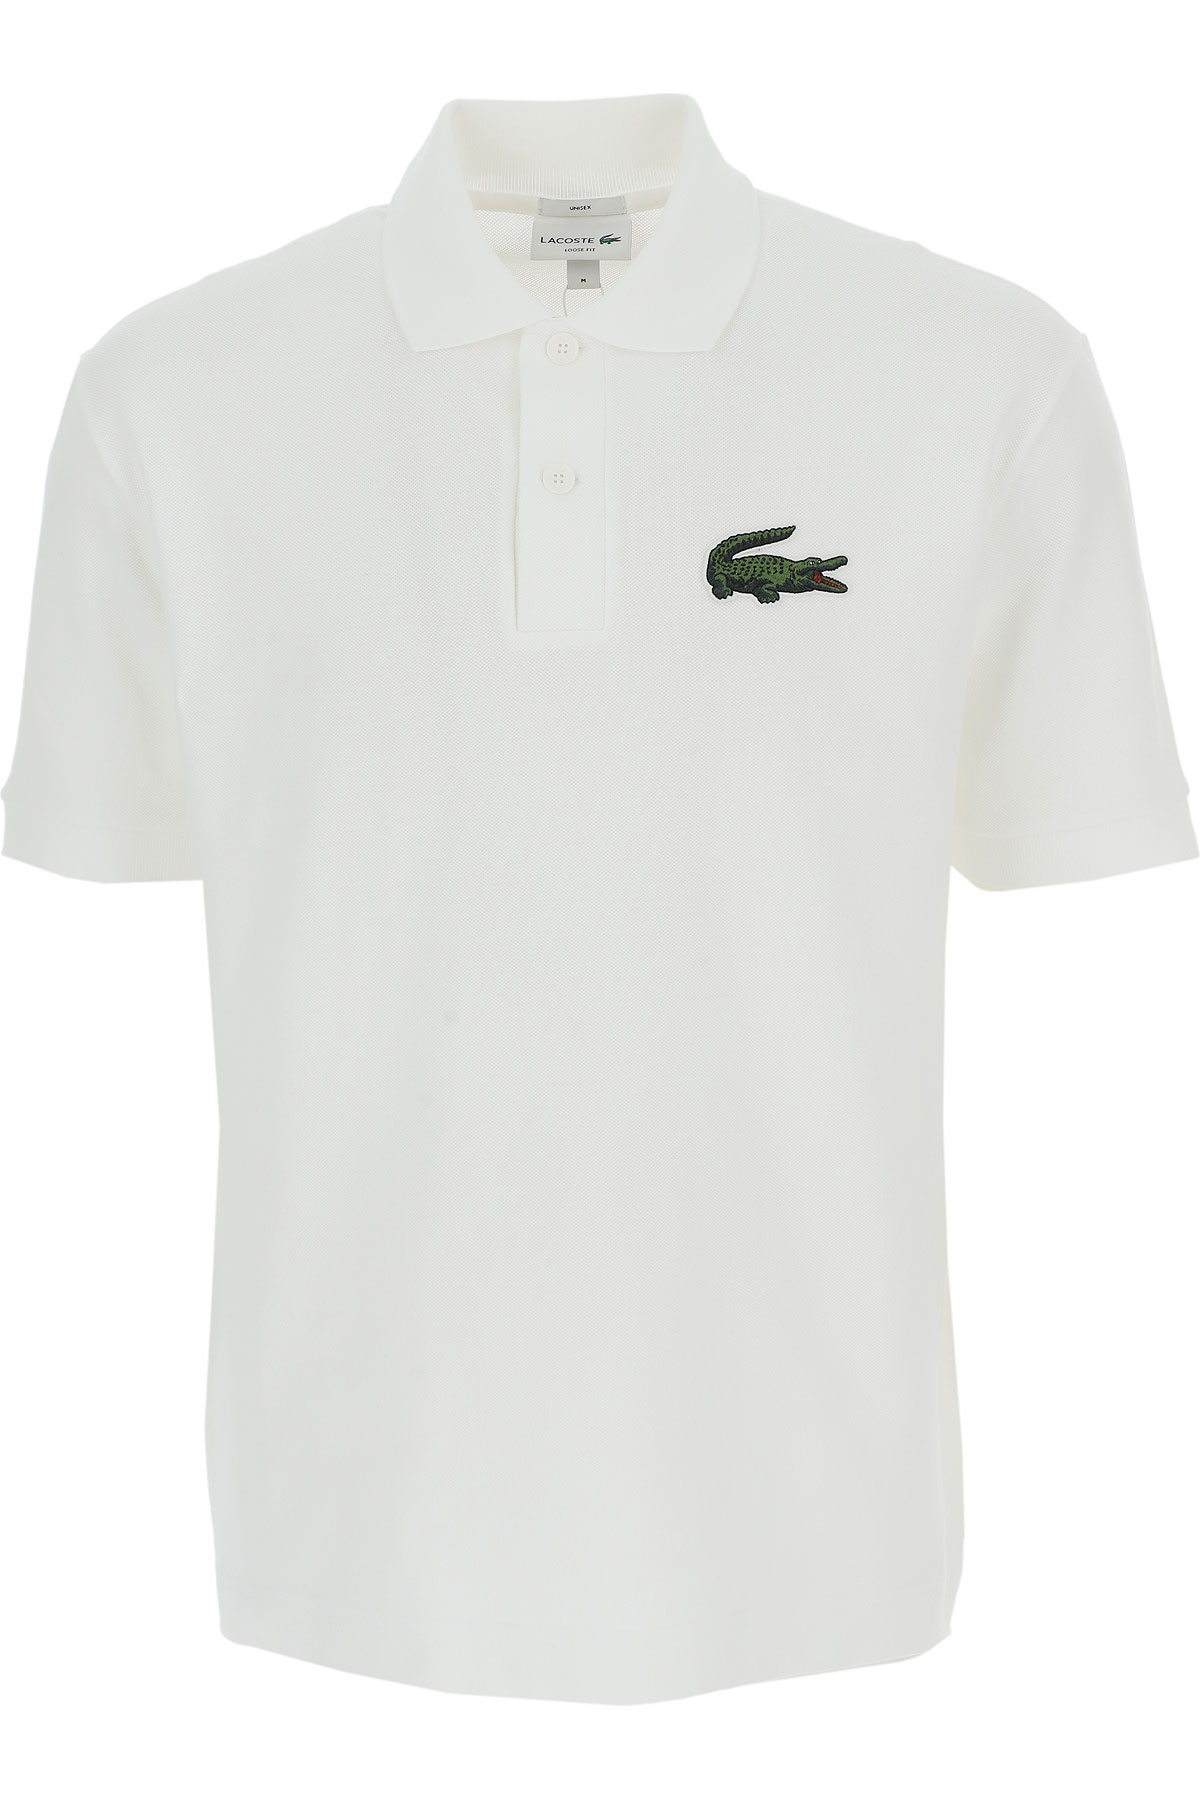 Mens Clothing Lacoste, Style code: ph3922-001-